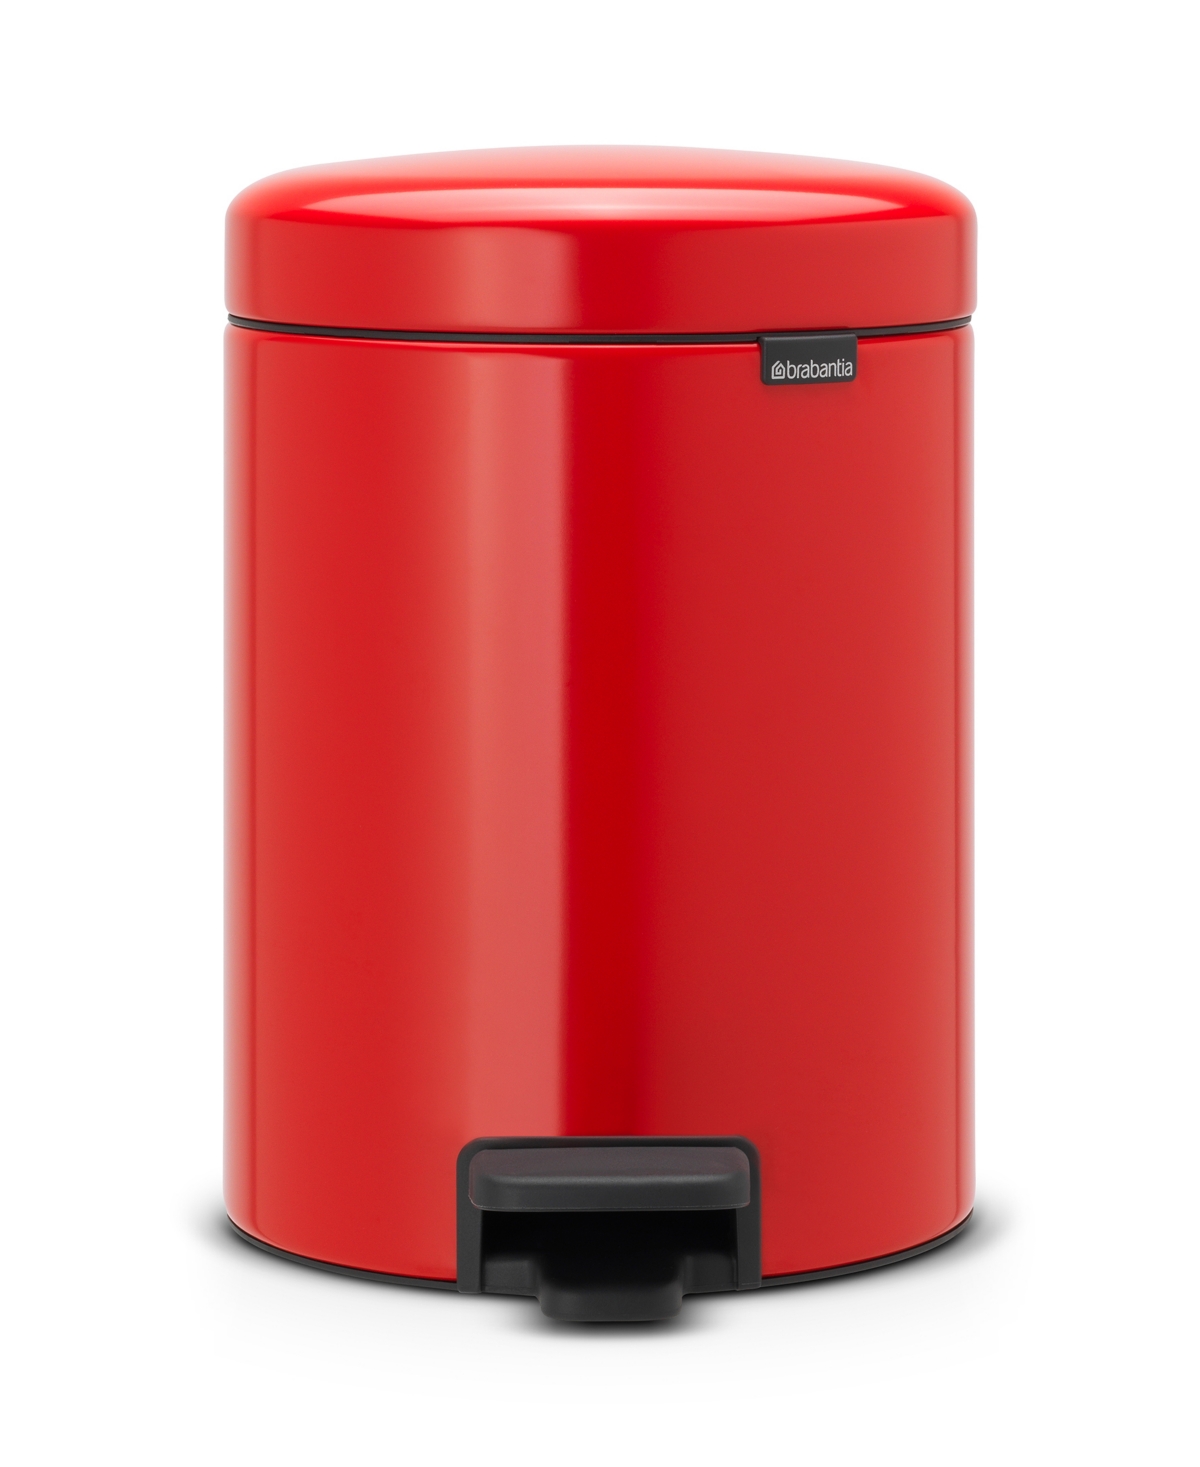 newIcon 1.3G Step Trash Can - Passion Red